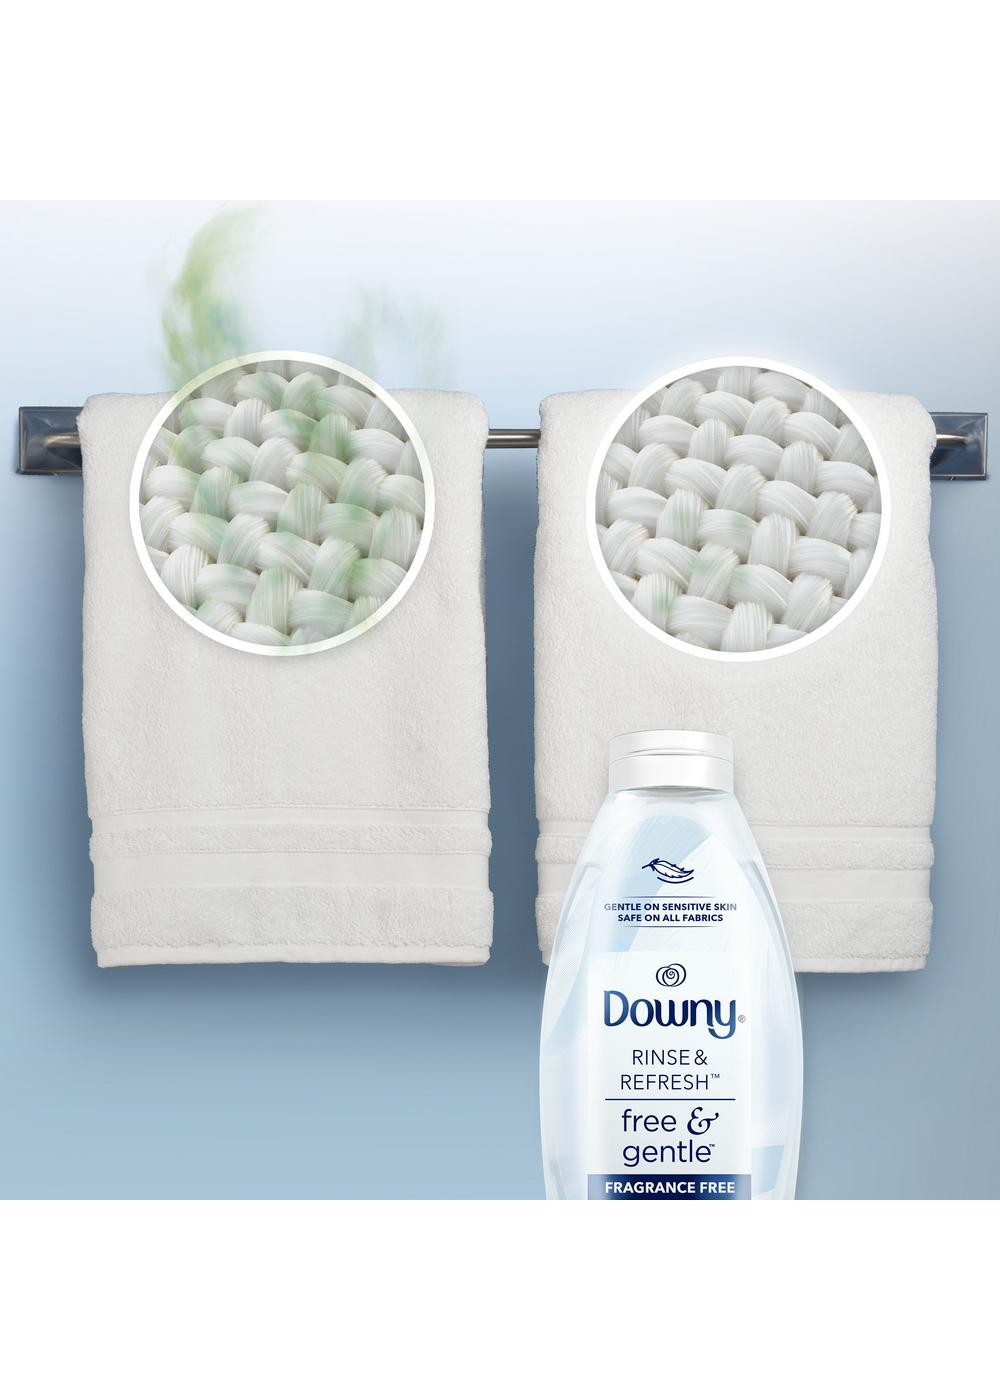 Downy Rinse & Refresh Laundry Odor Remover, 70 Loads - Free & Gentle; image 9 of 9